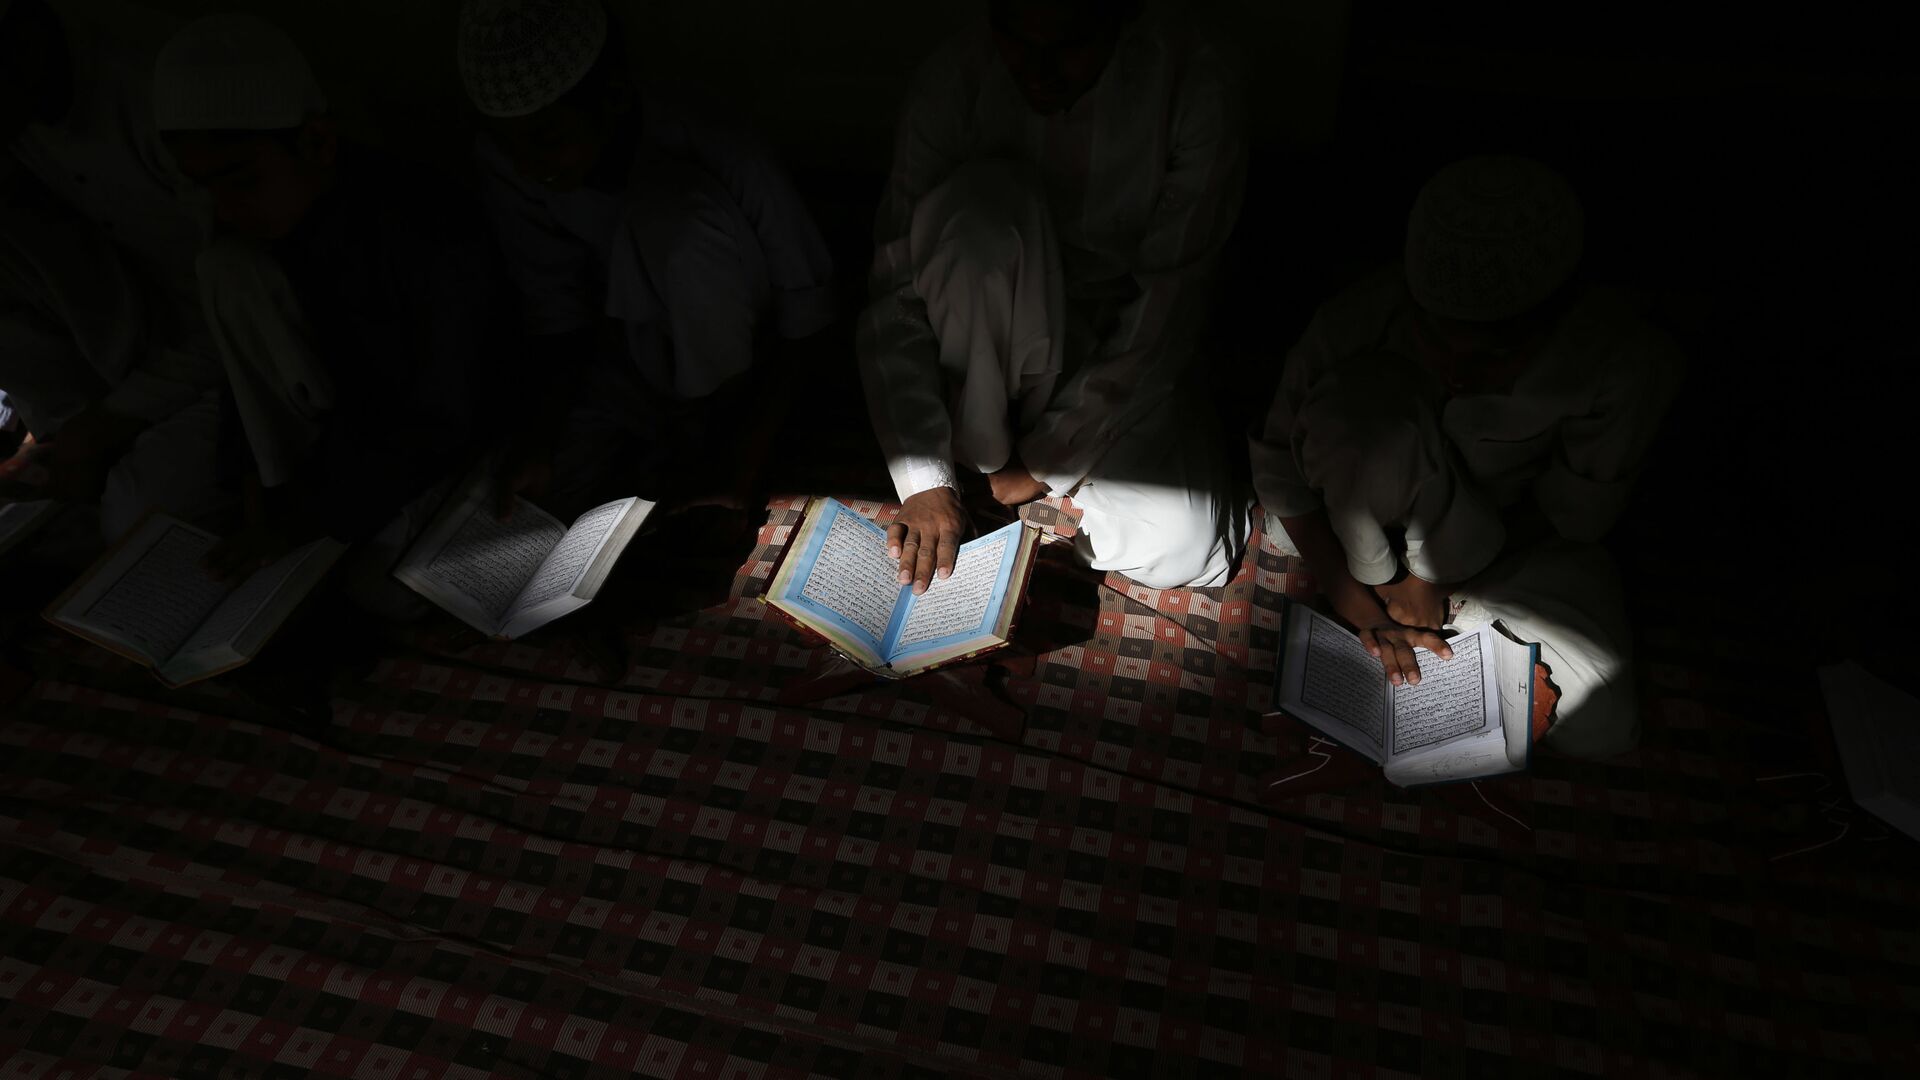 Indian Muslims  read the holy Quran at a mosque in Allahabad, Uttar Pradesh state, India, Tuesday, March 28, 2017 - Sputnik International, 1920, 06.09.2021